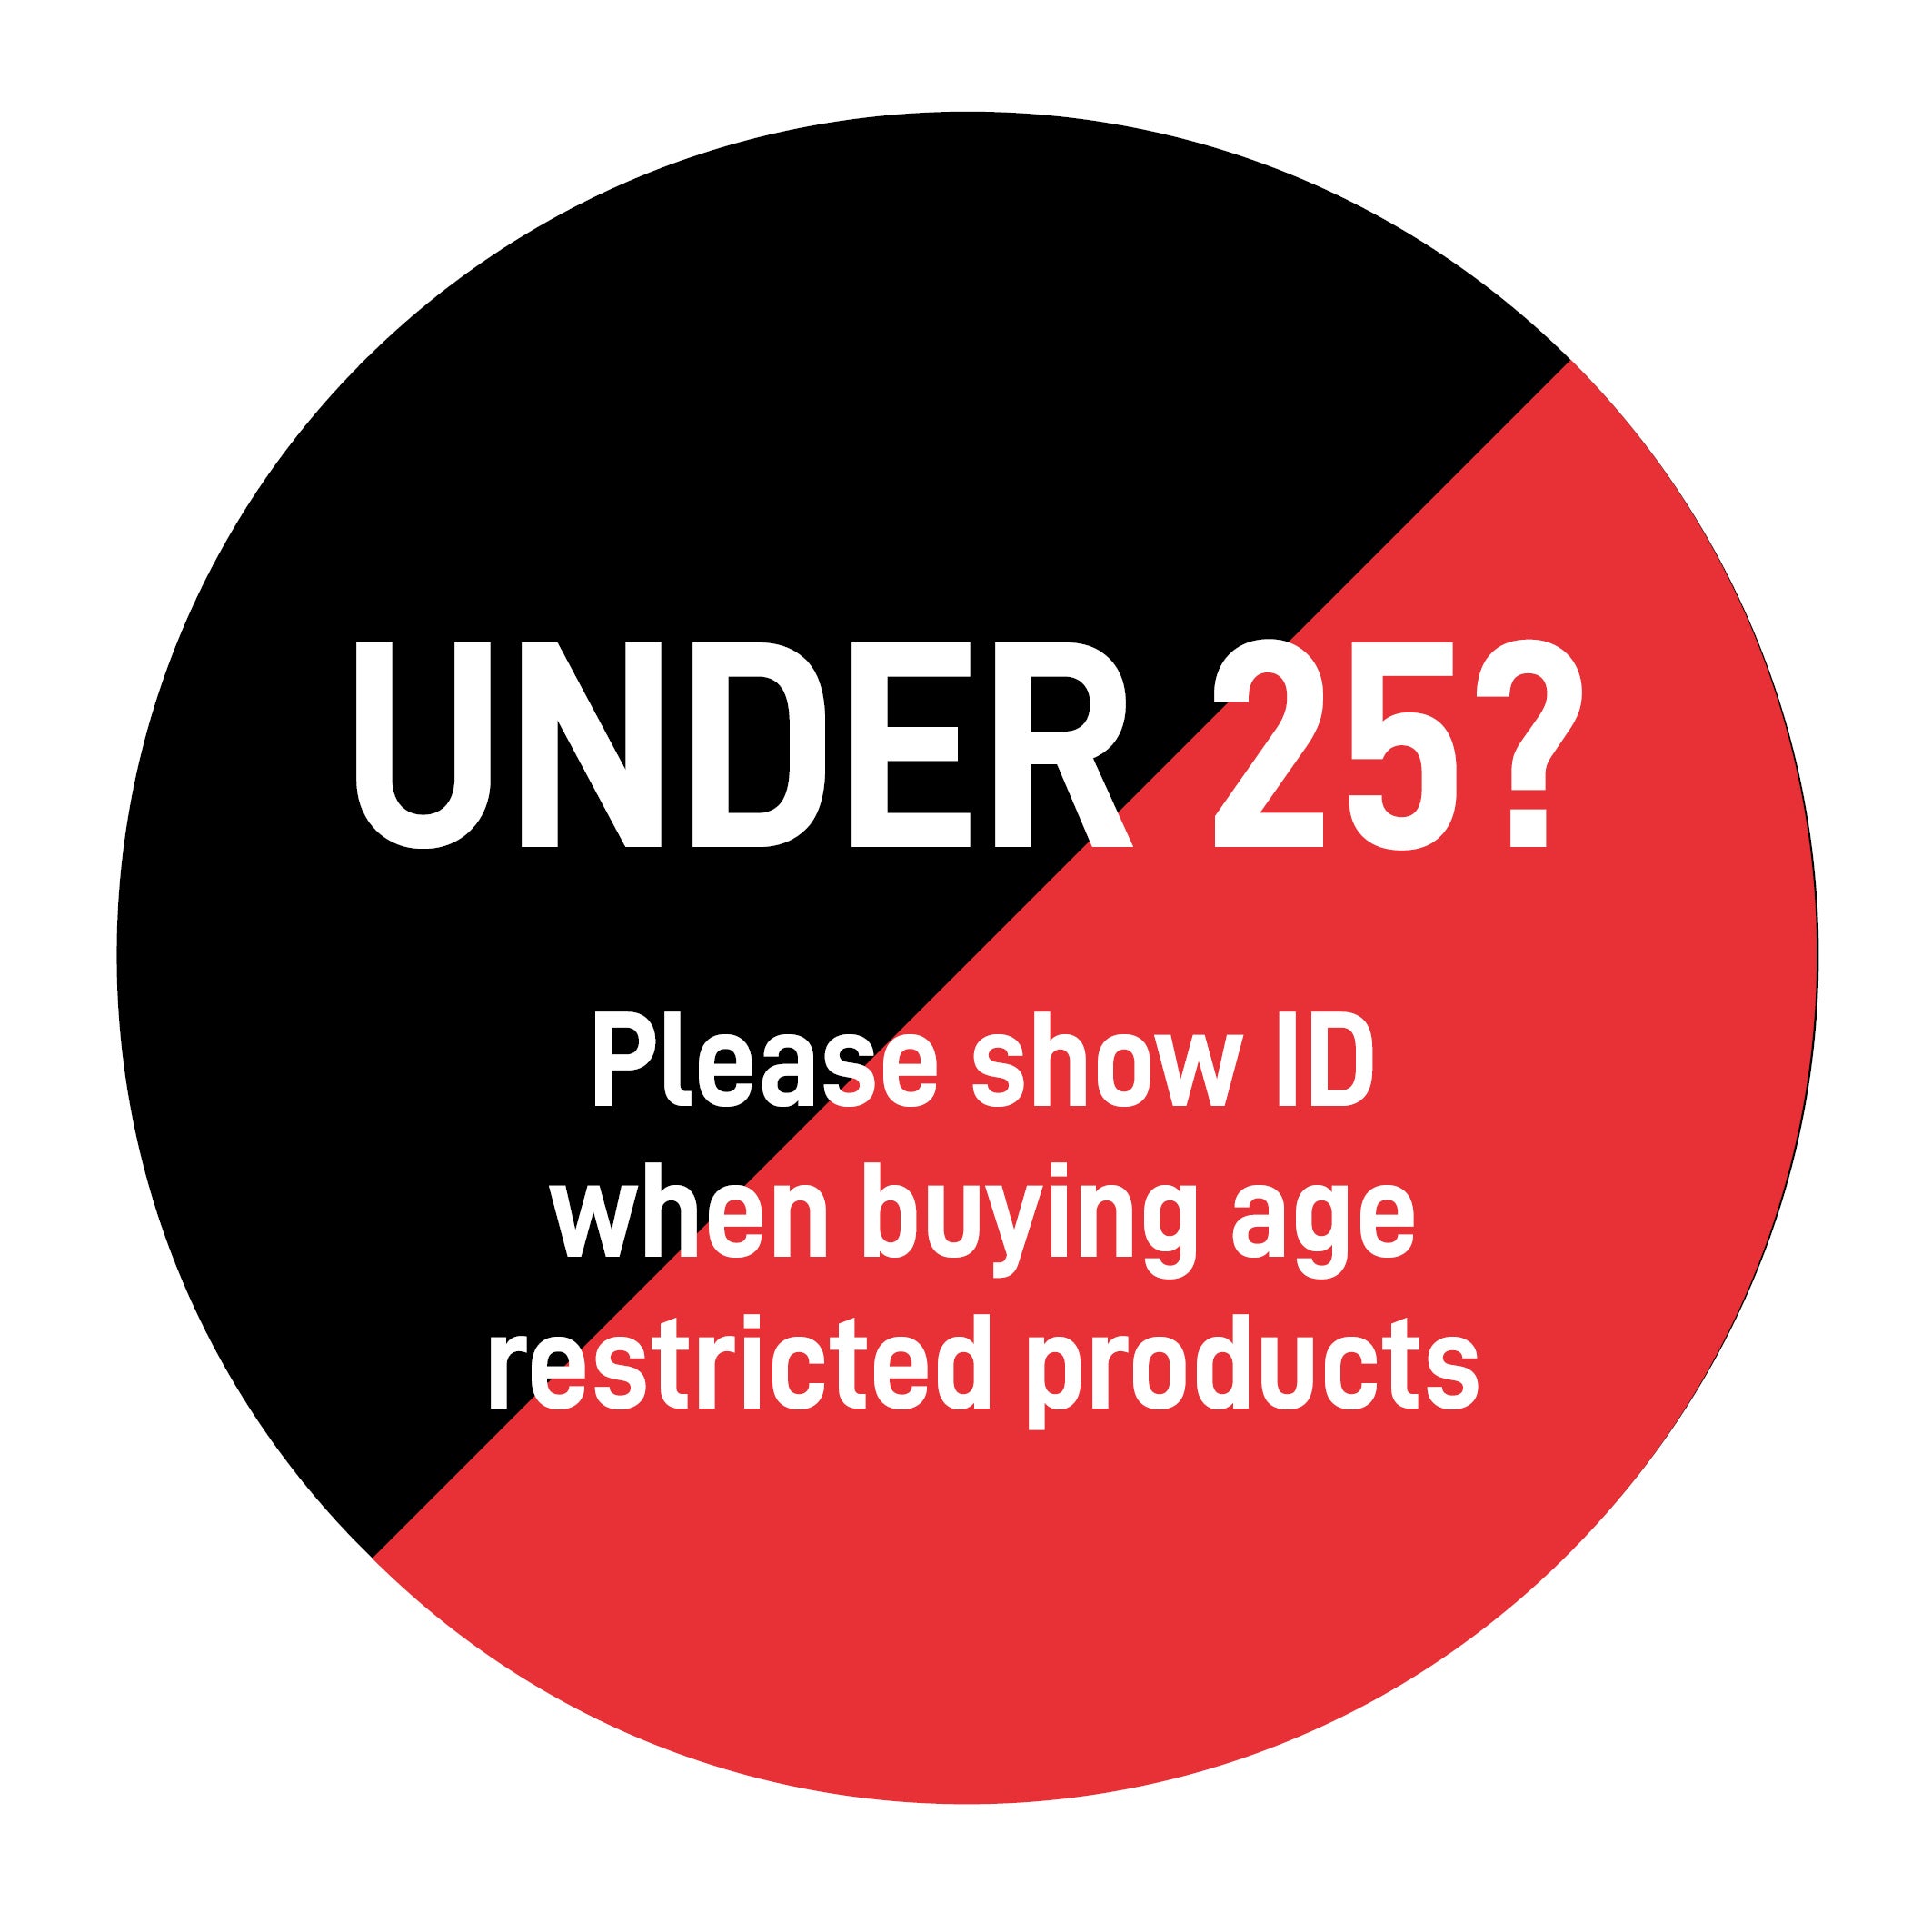 6-scotland-age-restricted-products-badge.jpg